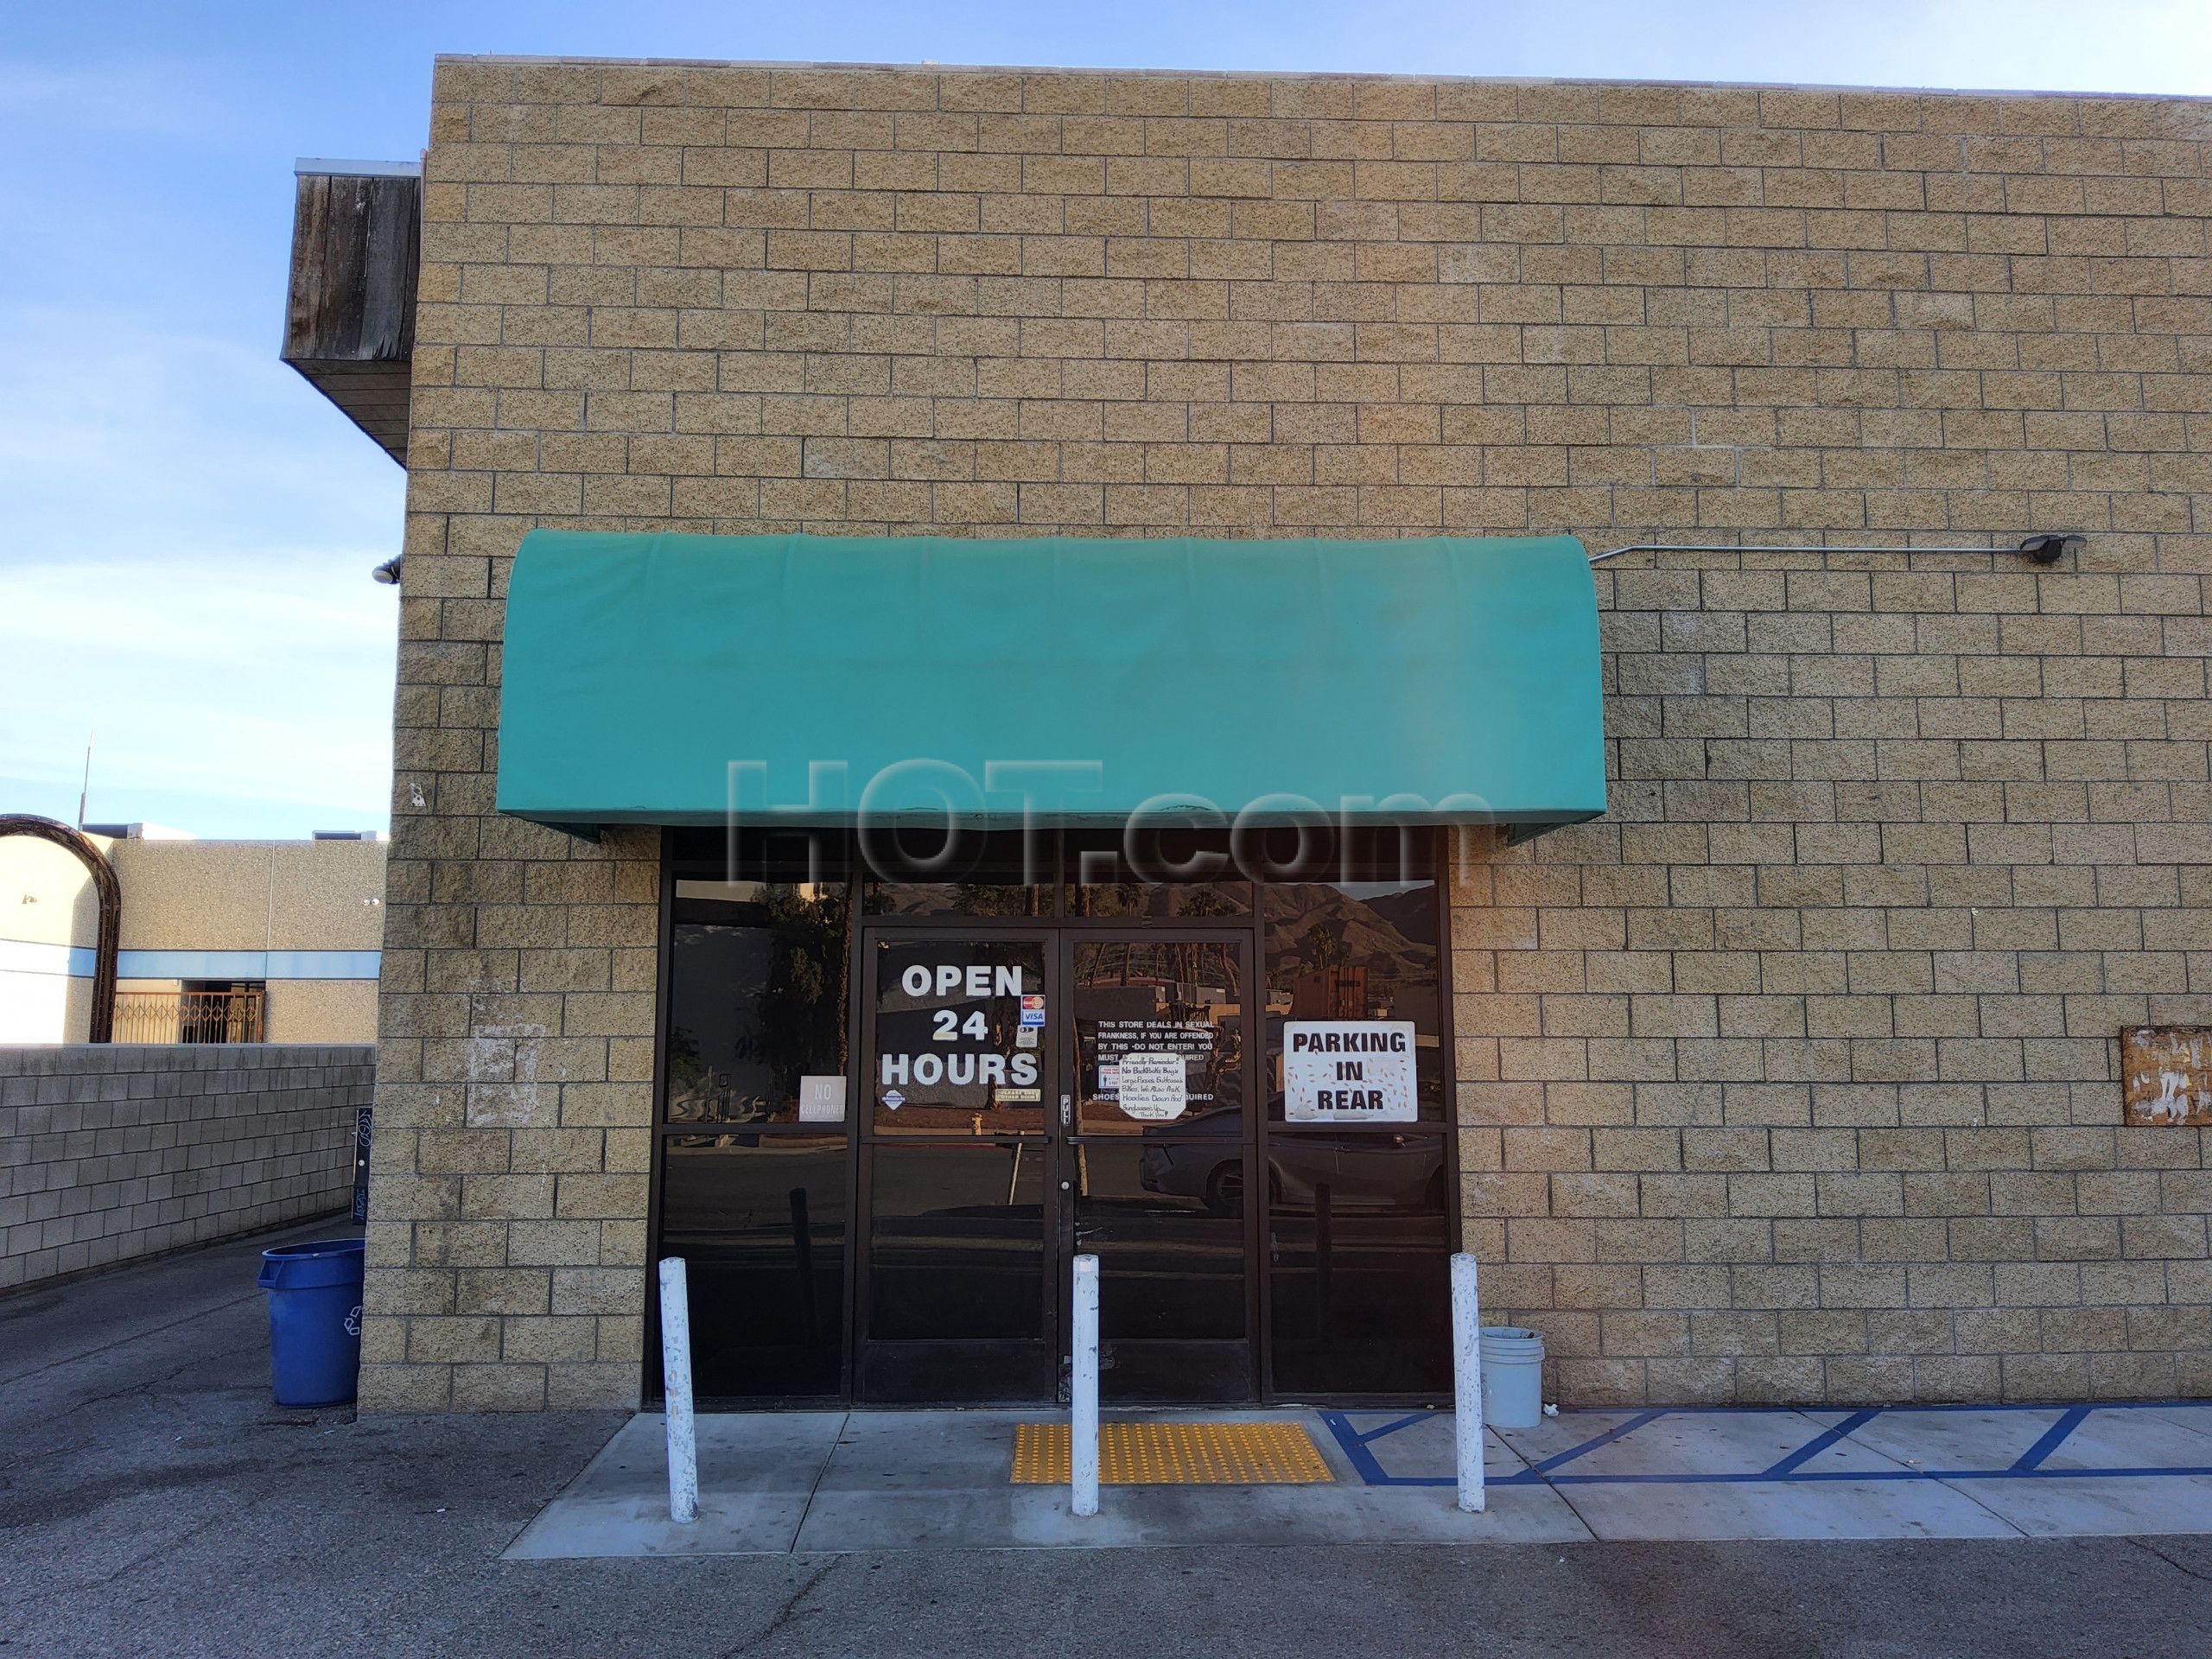 Cathedral City, California Perez Images Videos